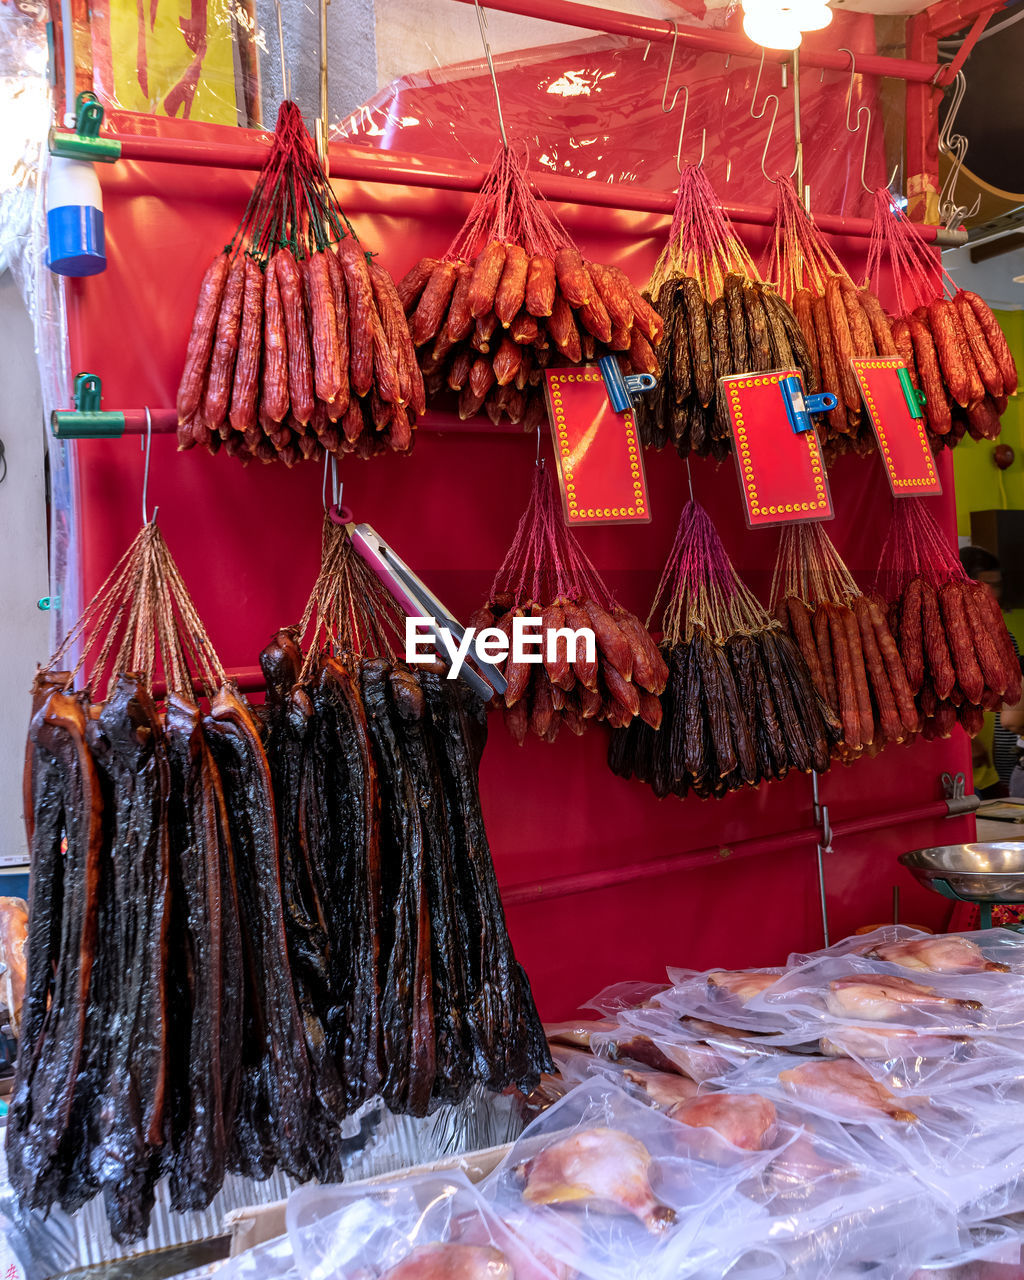 Hanging dried sausages and meat products in a butcher shop display. singapore, chinatown